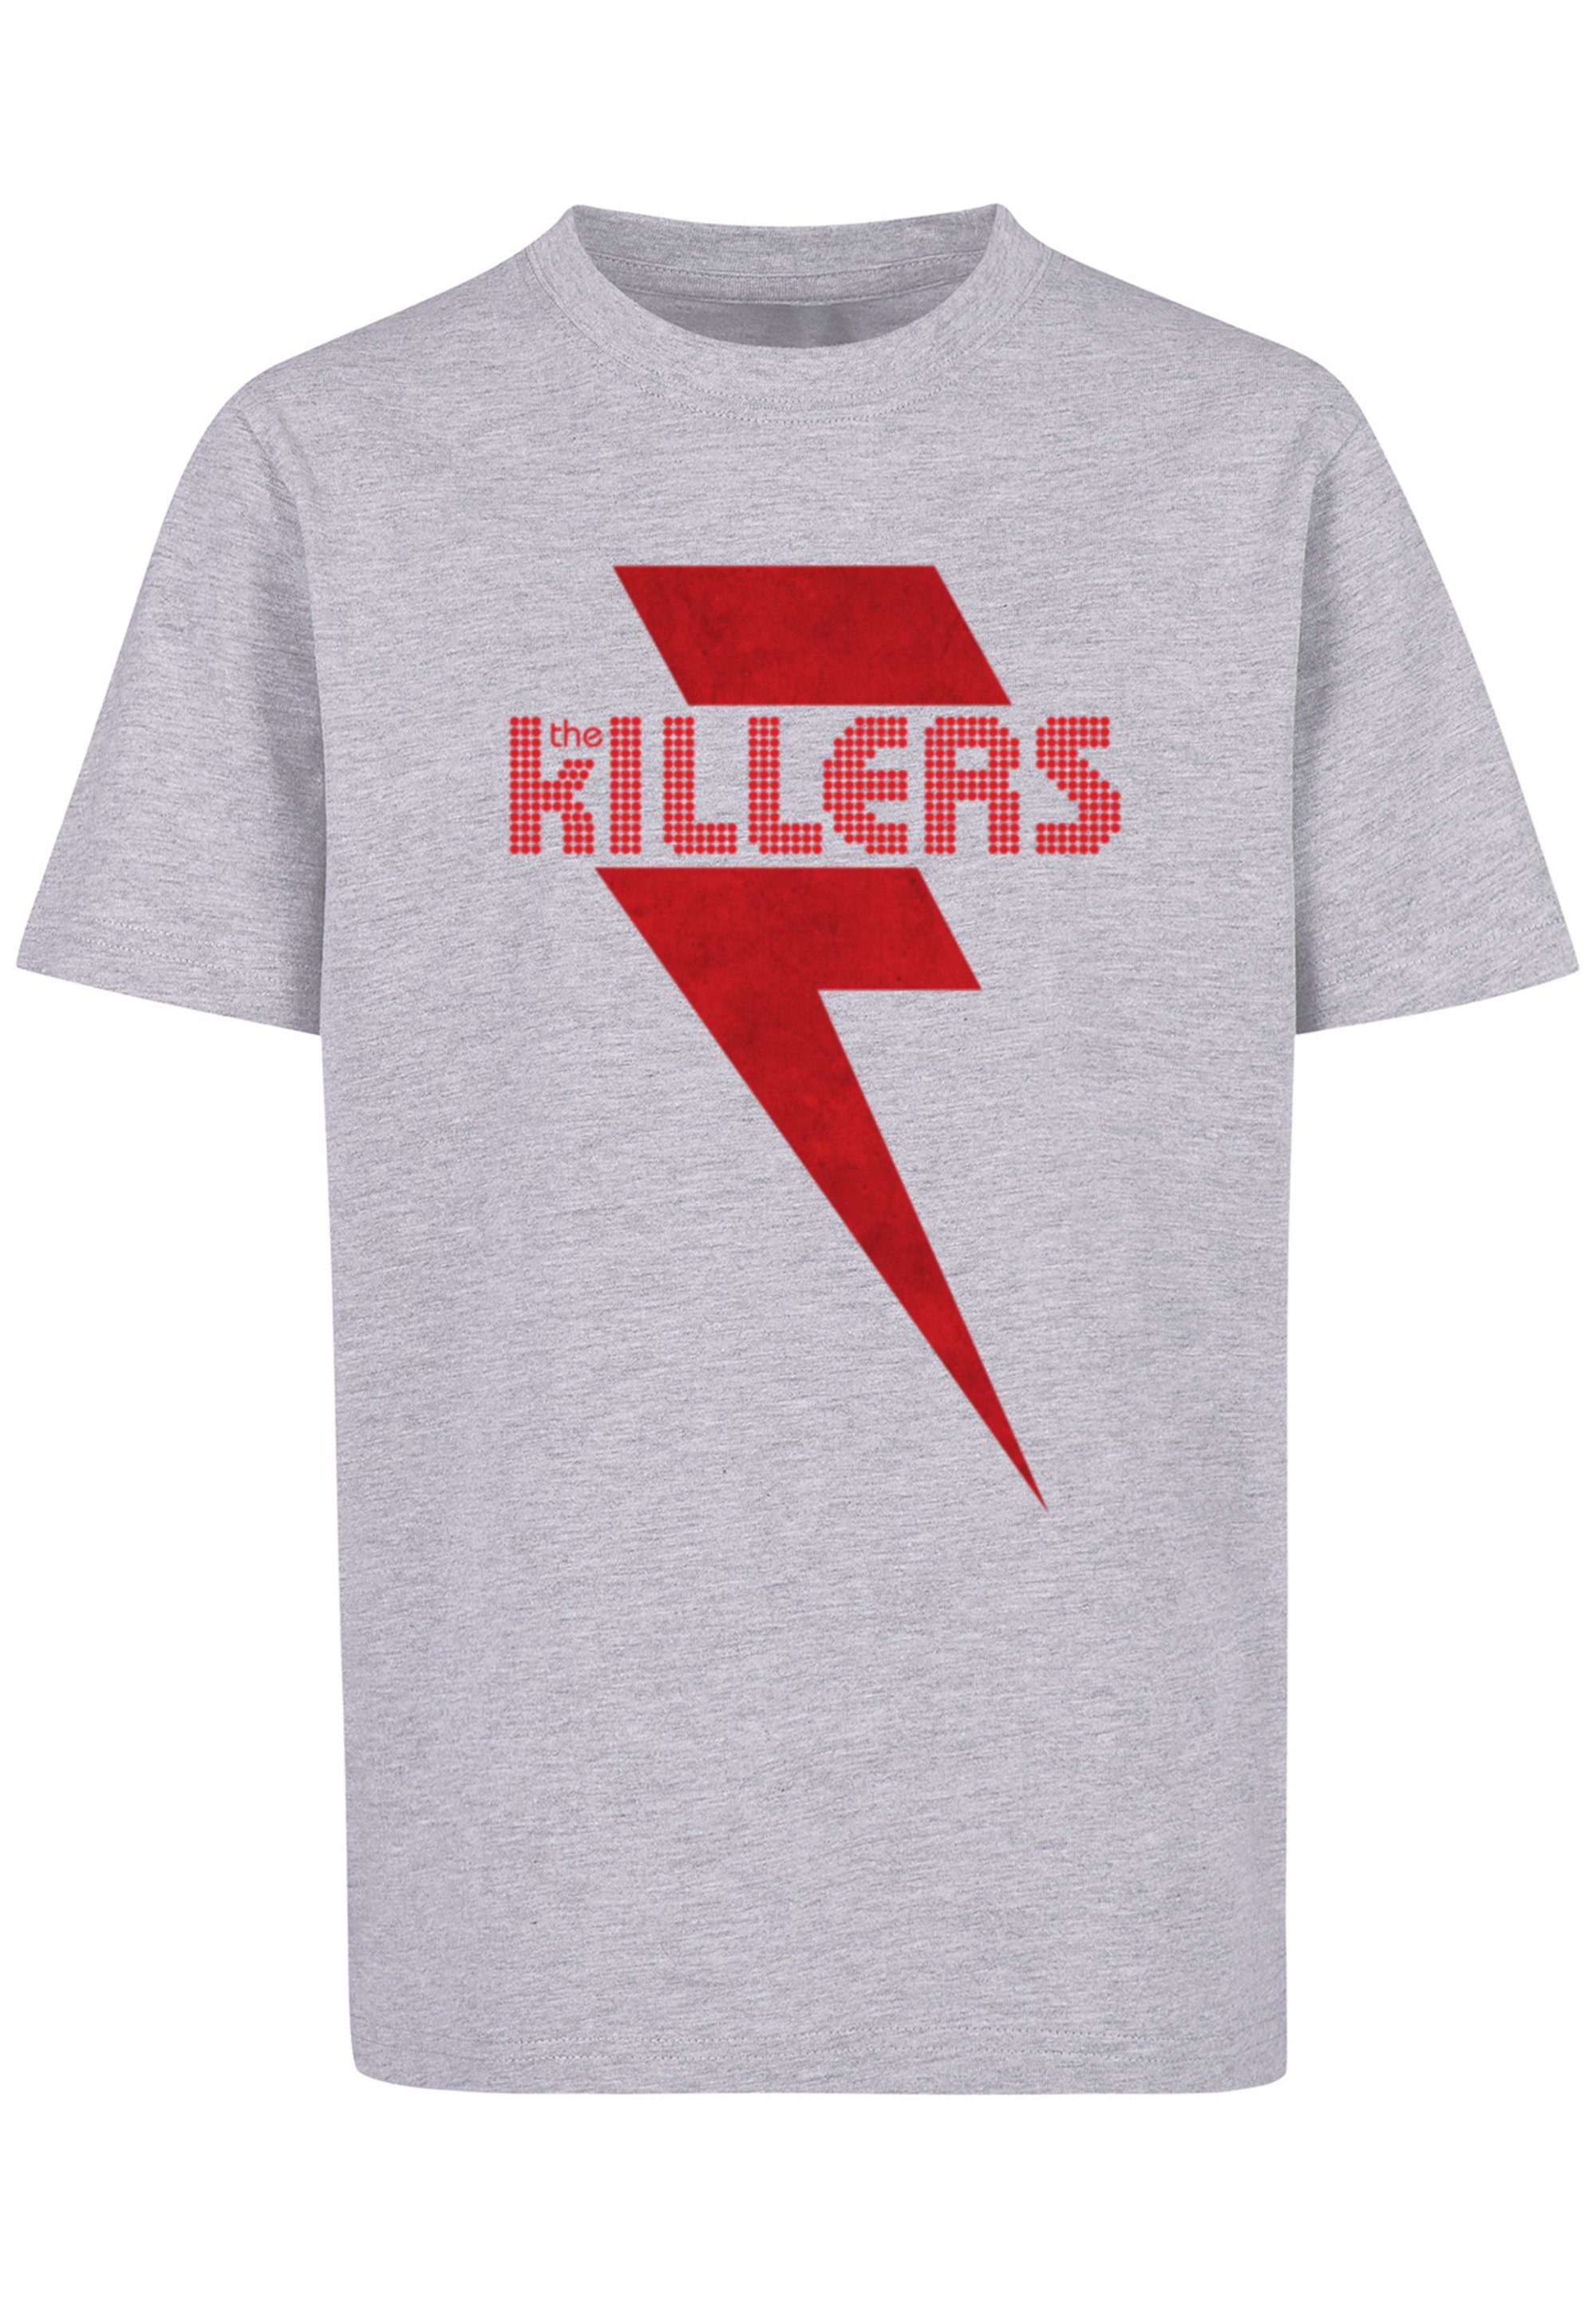 F4NT4STIC T-Shirt The Killers Rock Band Print heather Bolt grey Red